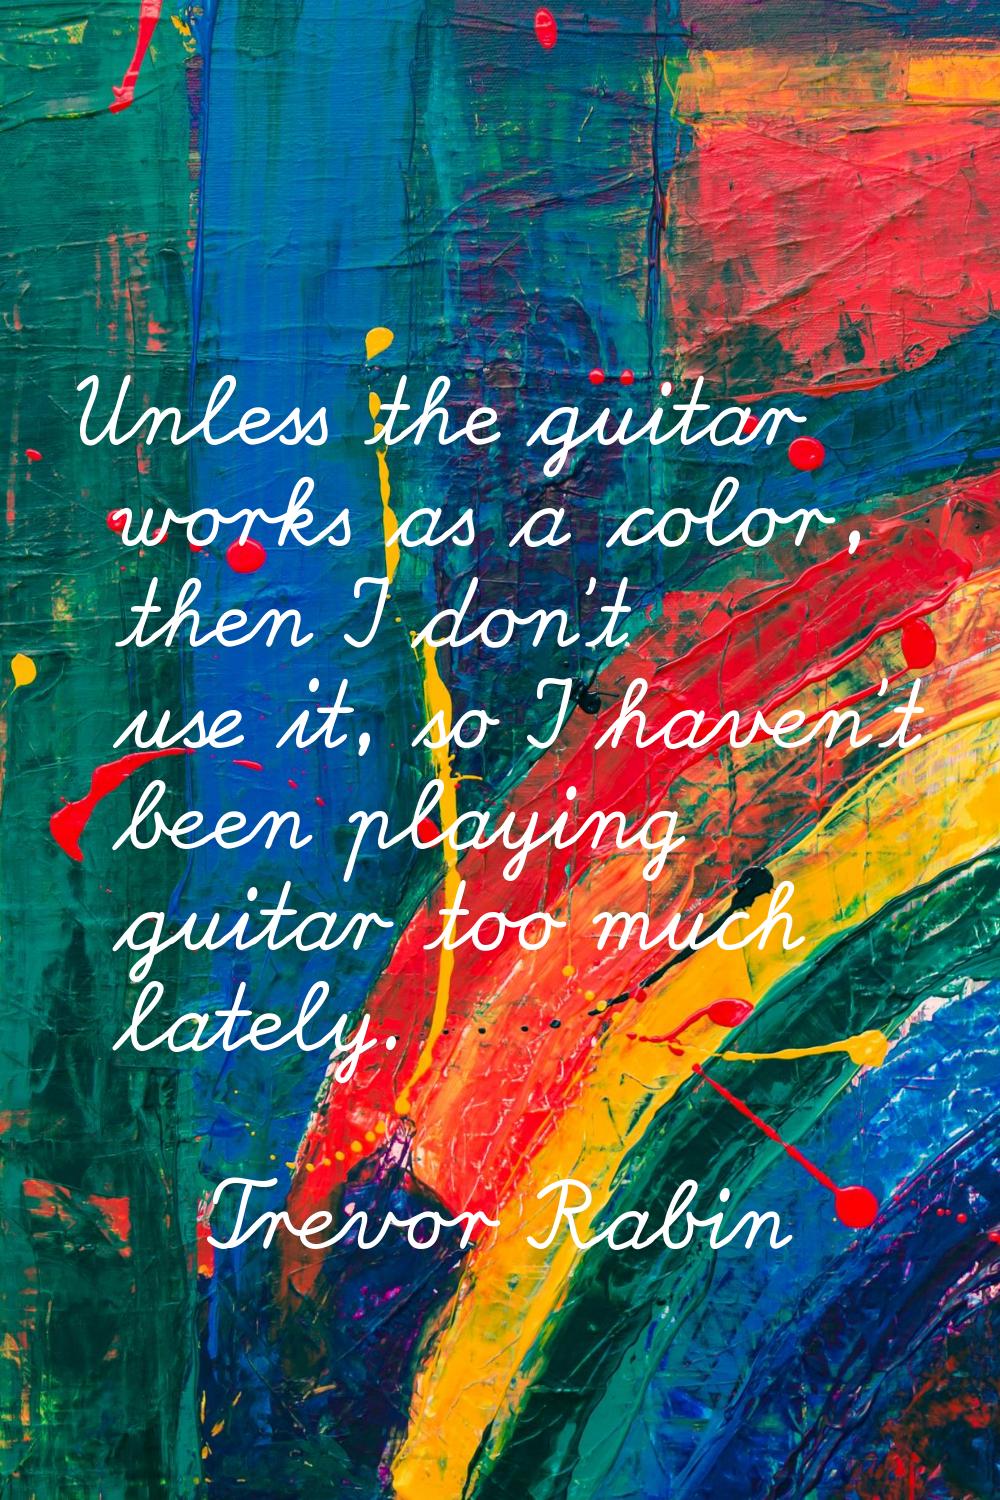 Unless the guitar works as a color, then I don't use it, so I haven't been playing guitar too much 